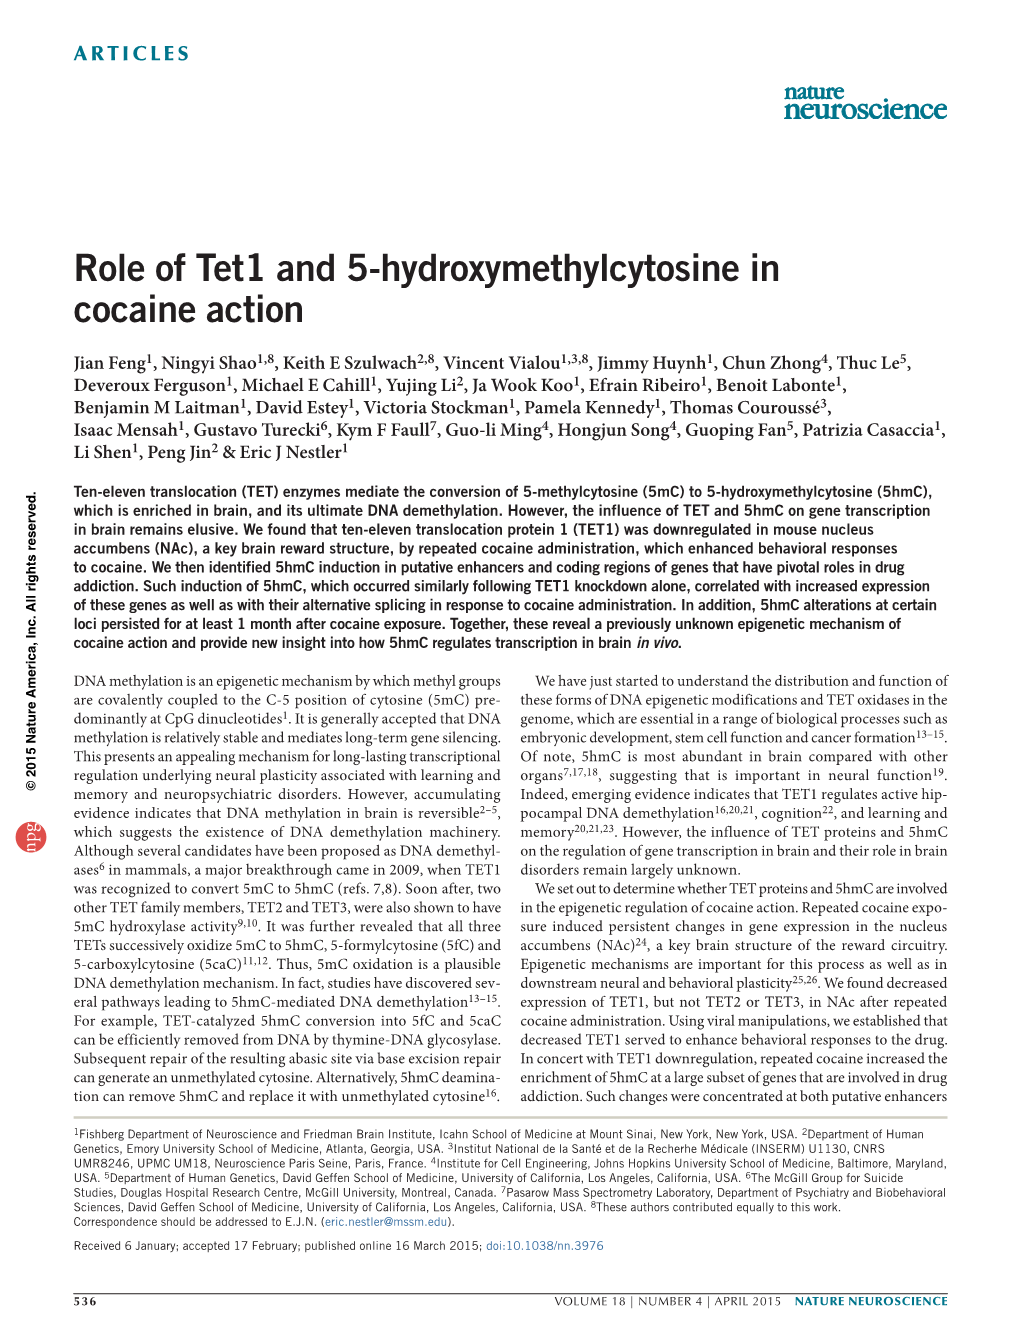 Role of Tet1 and 5-Hydroxymethylcytosine in Cocaine Action